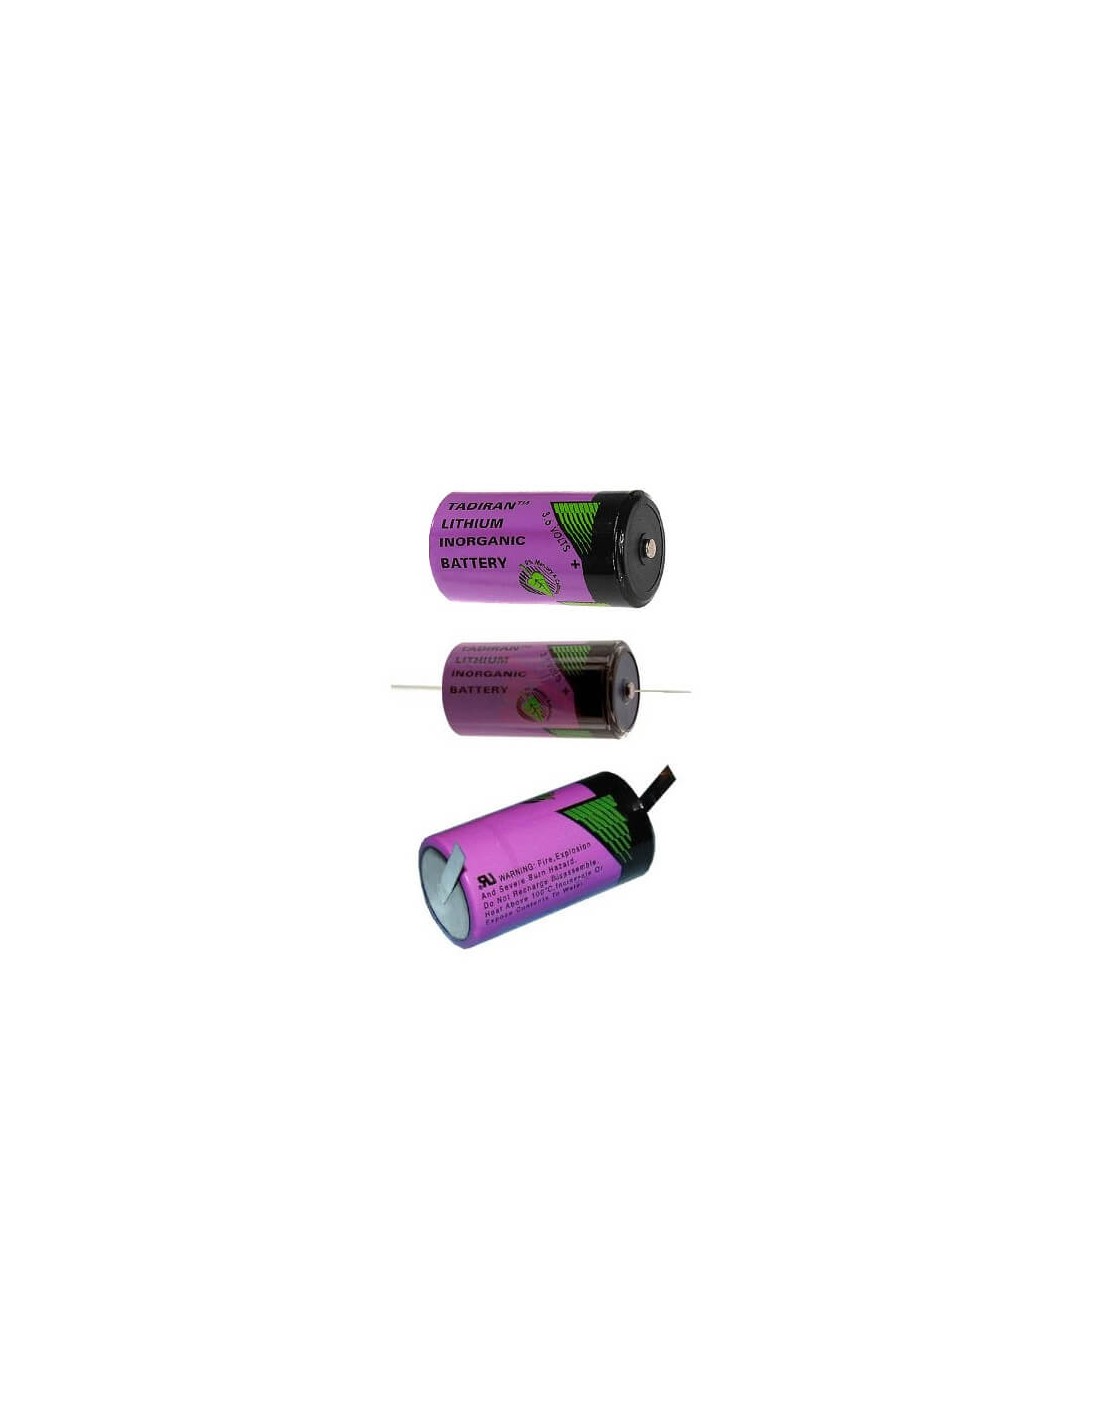 Tadiran TL-2200/S 3.6V C Size 7200Mah Lithium Battery replaces ER26500 & LS26500 3.6V - Non Rechargeable